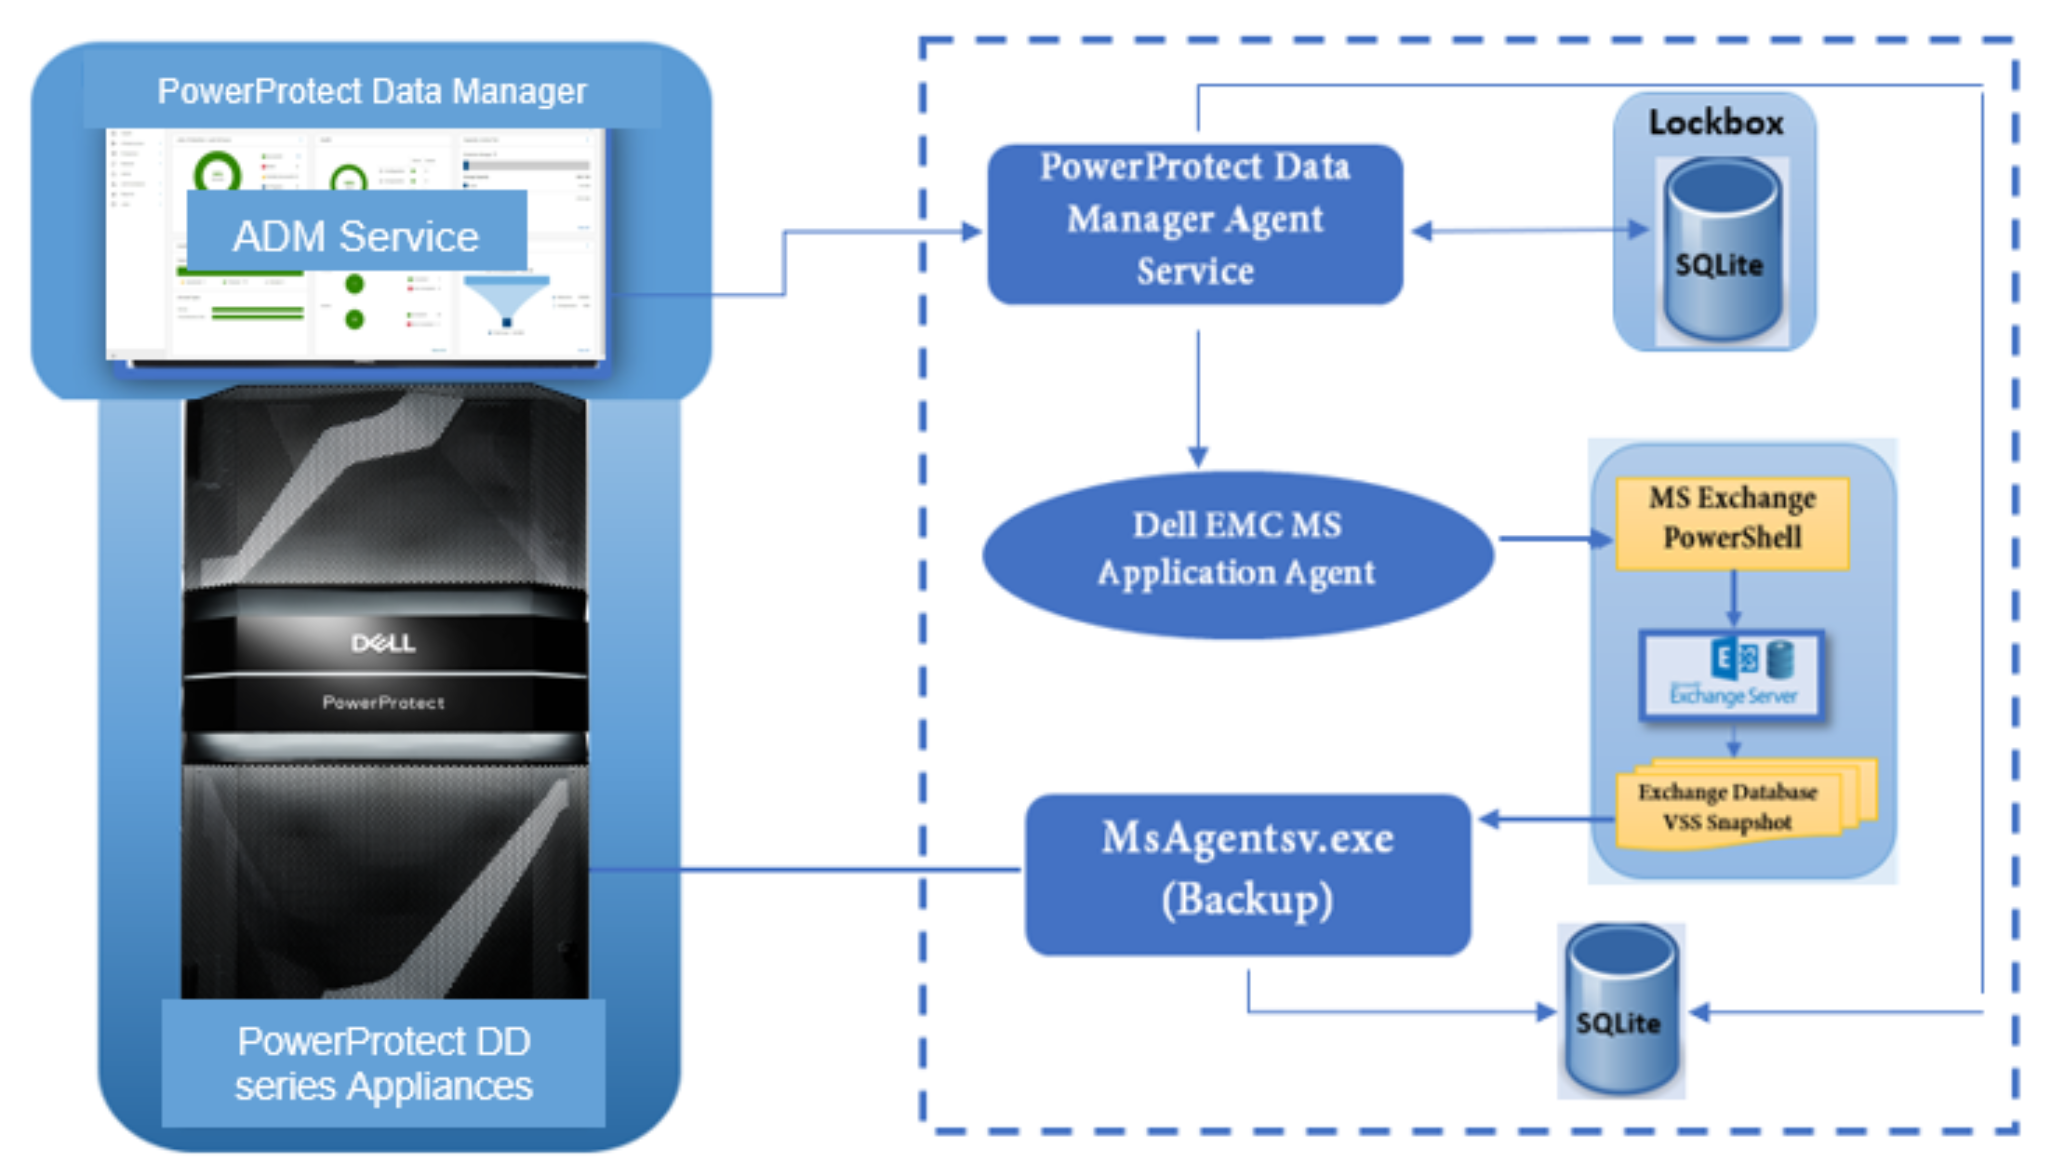 The image shows an overview of Microsoft application agent for Exchange Server